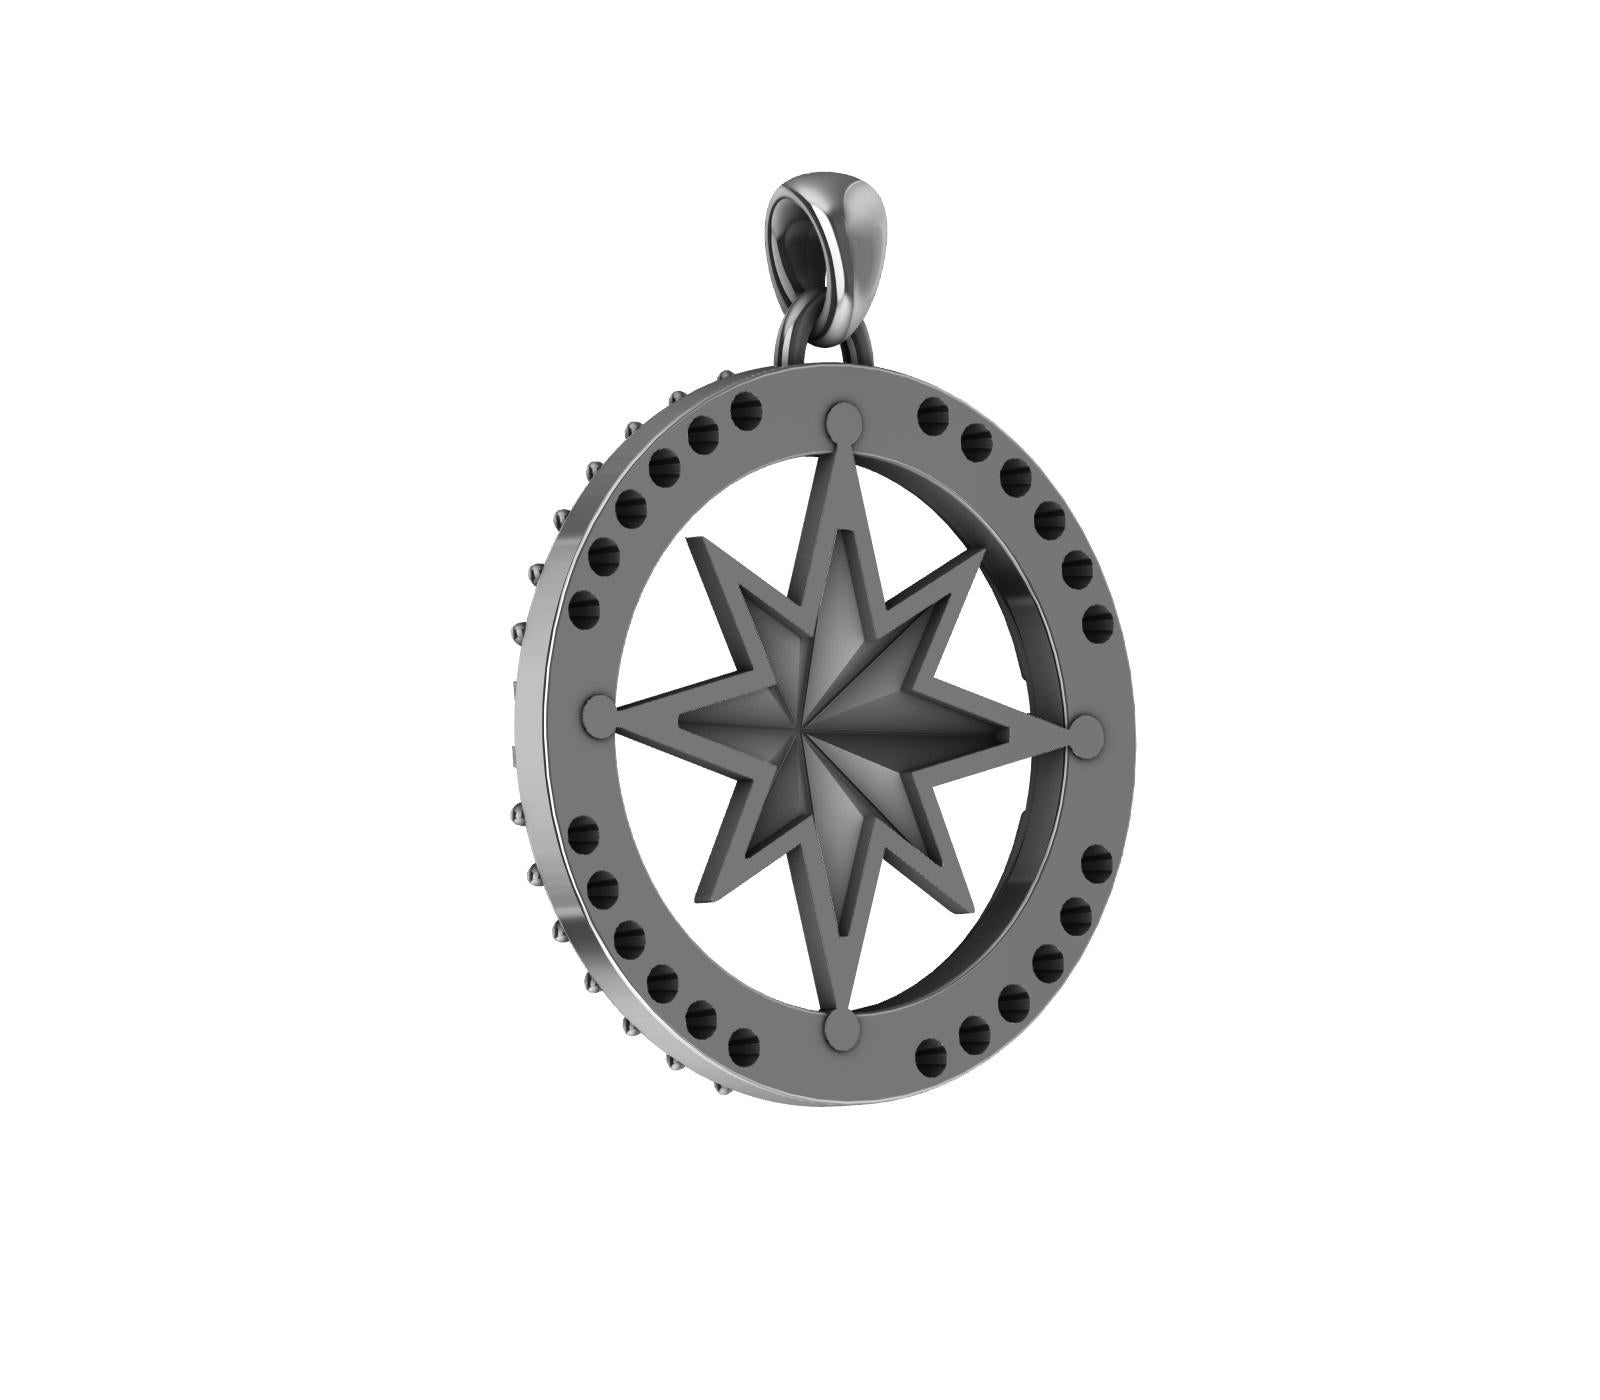  18 Karat White Gold and Sterling Diamond Sailors Compass Pendant, For you water and wind lovers. Tiffany Designer , Thomas Kurilla has not forgotten you mates. Inspired from antique sailor's compasses. A sailing lover as well. Wear this and you'll